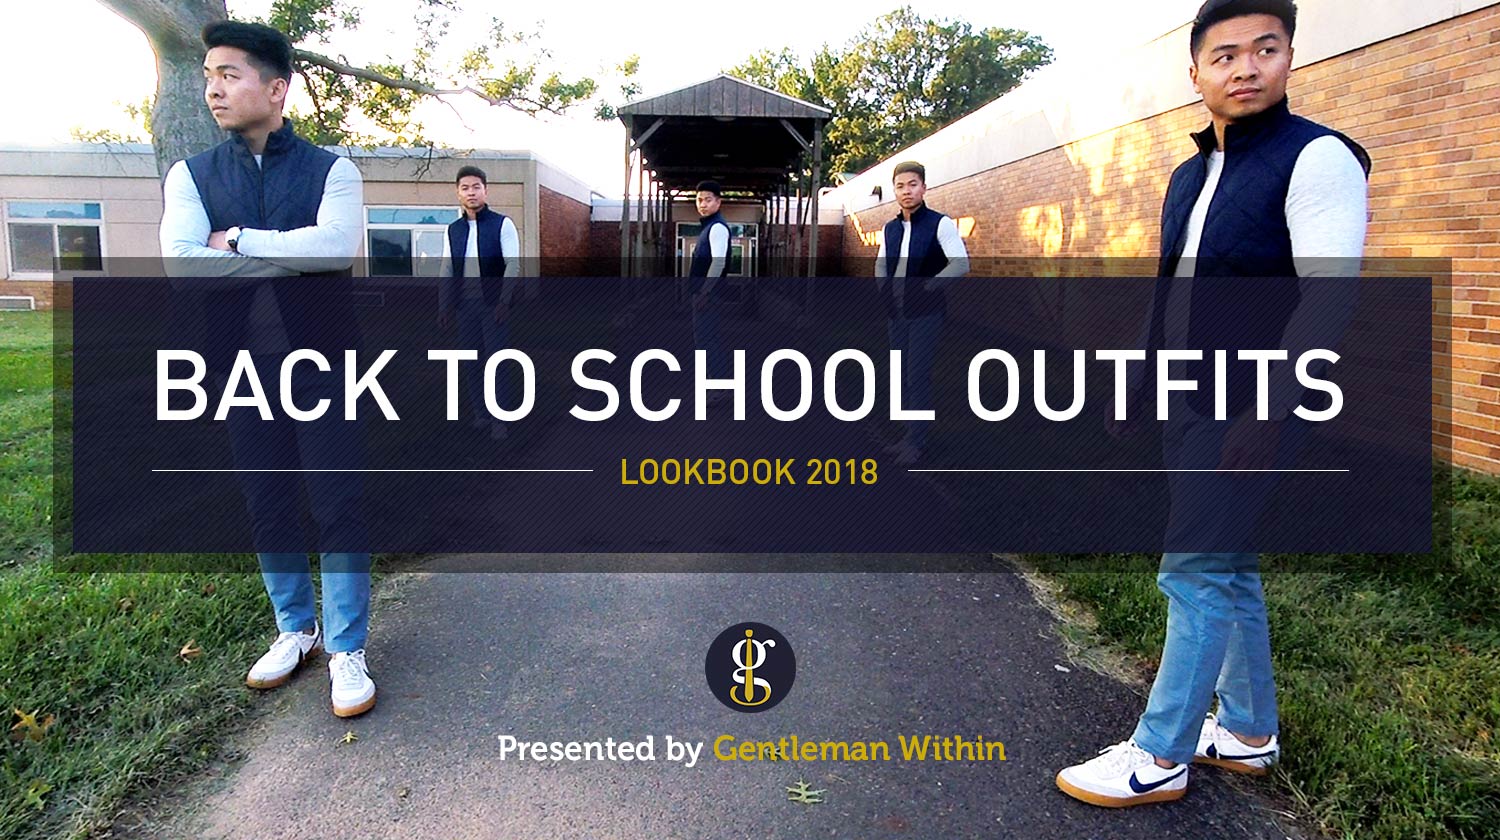 Back to School Outfits for Men | GENTLEMAN WITHIN